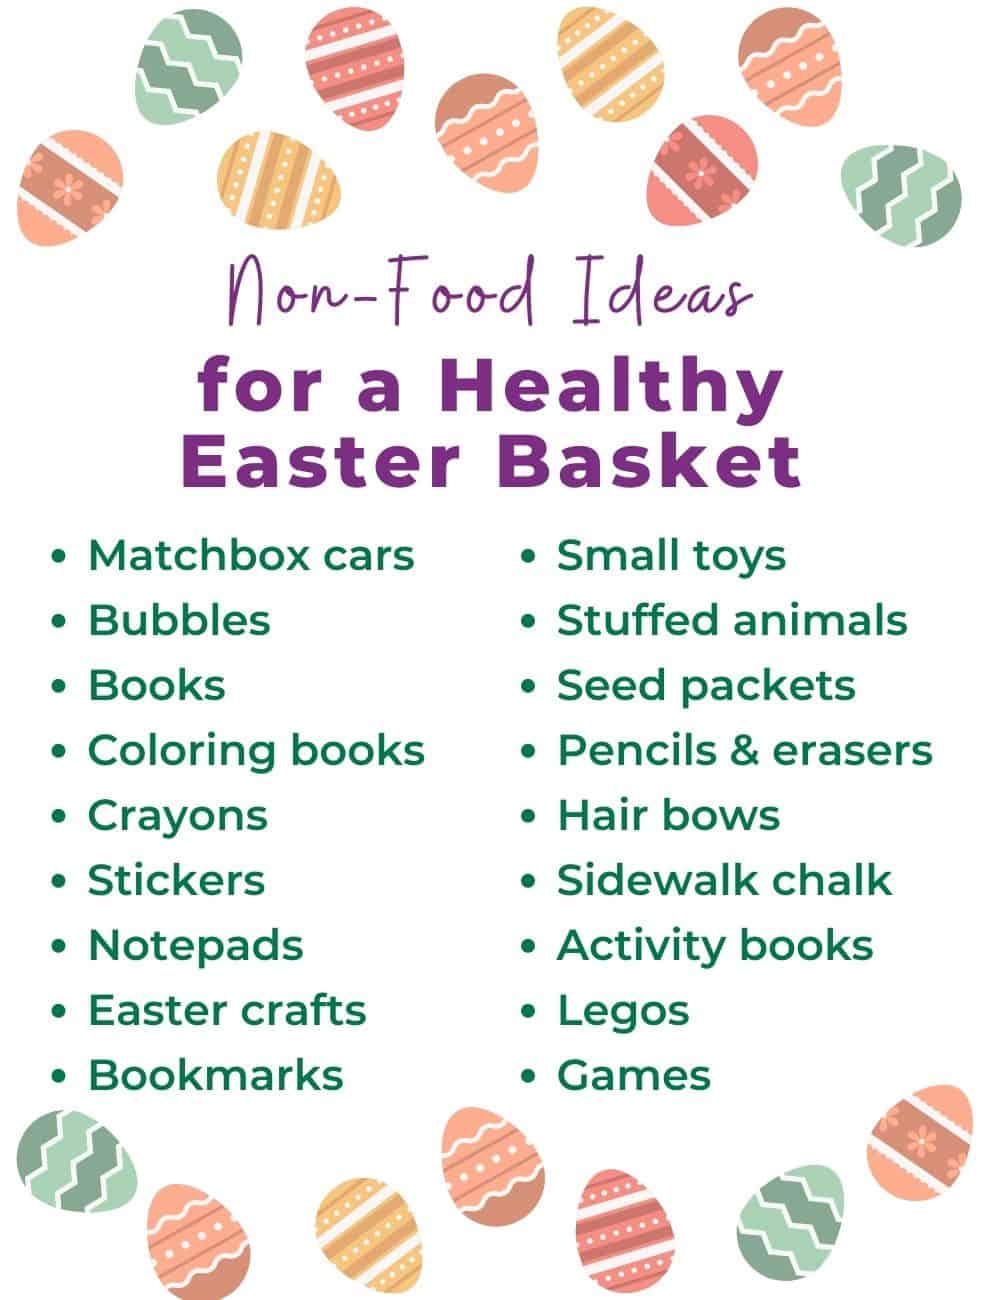 How to Build a Healthier Easter Basket with non food items